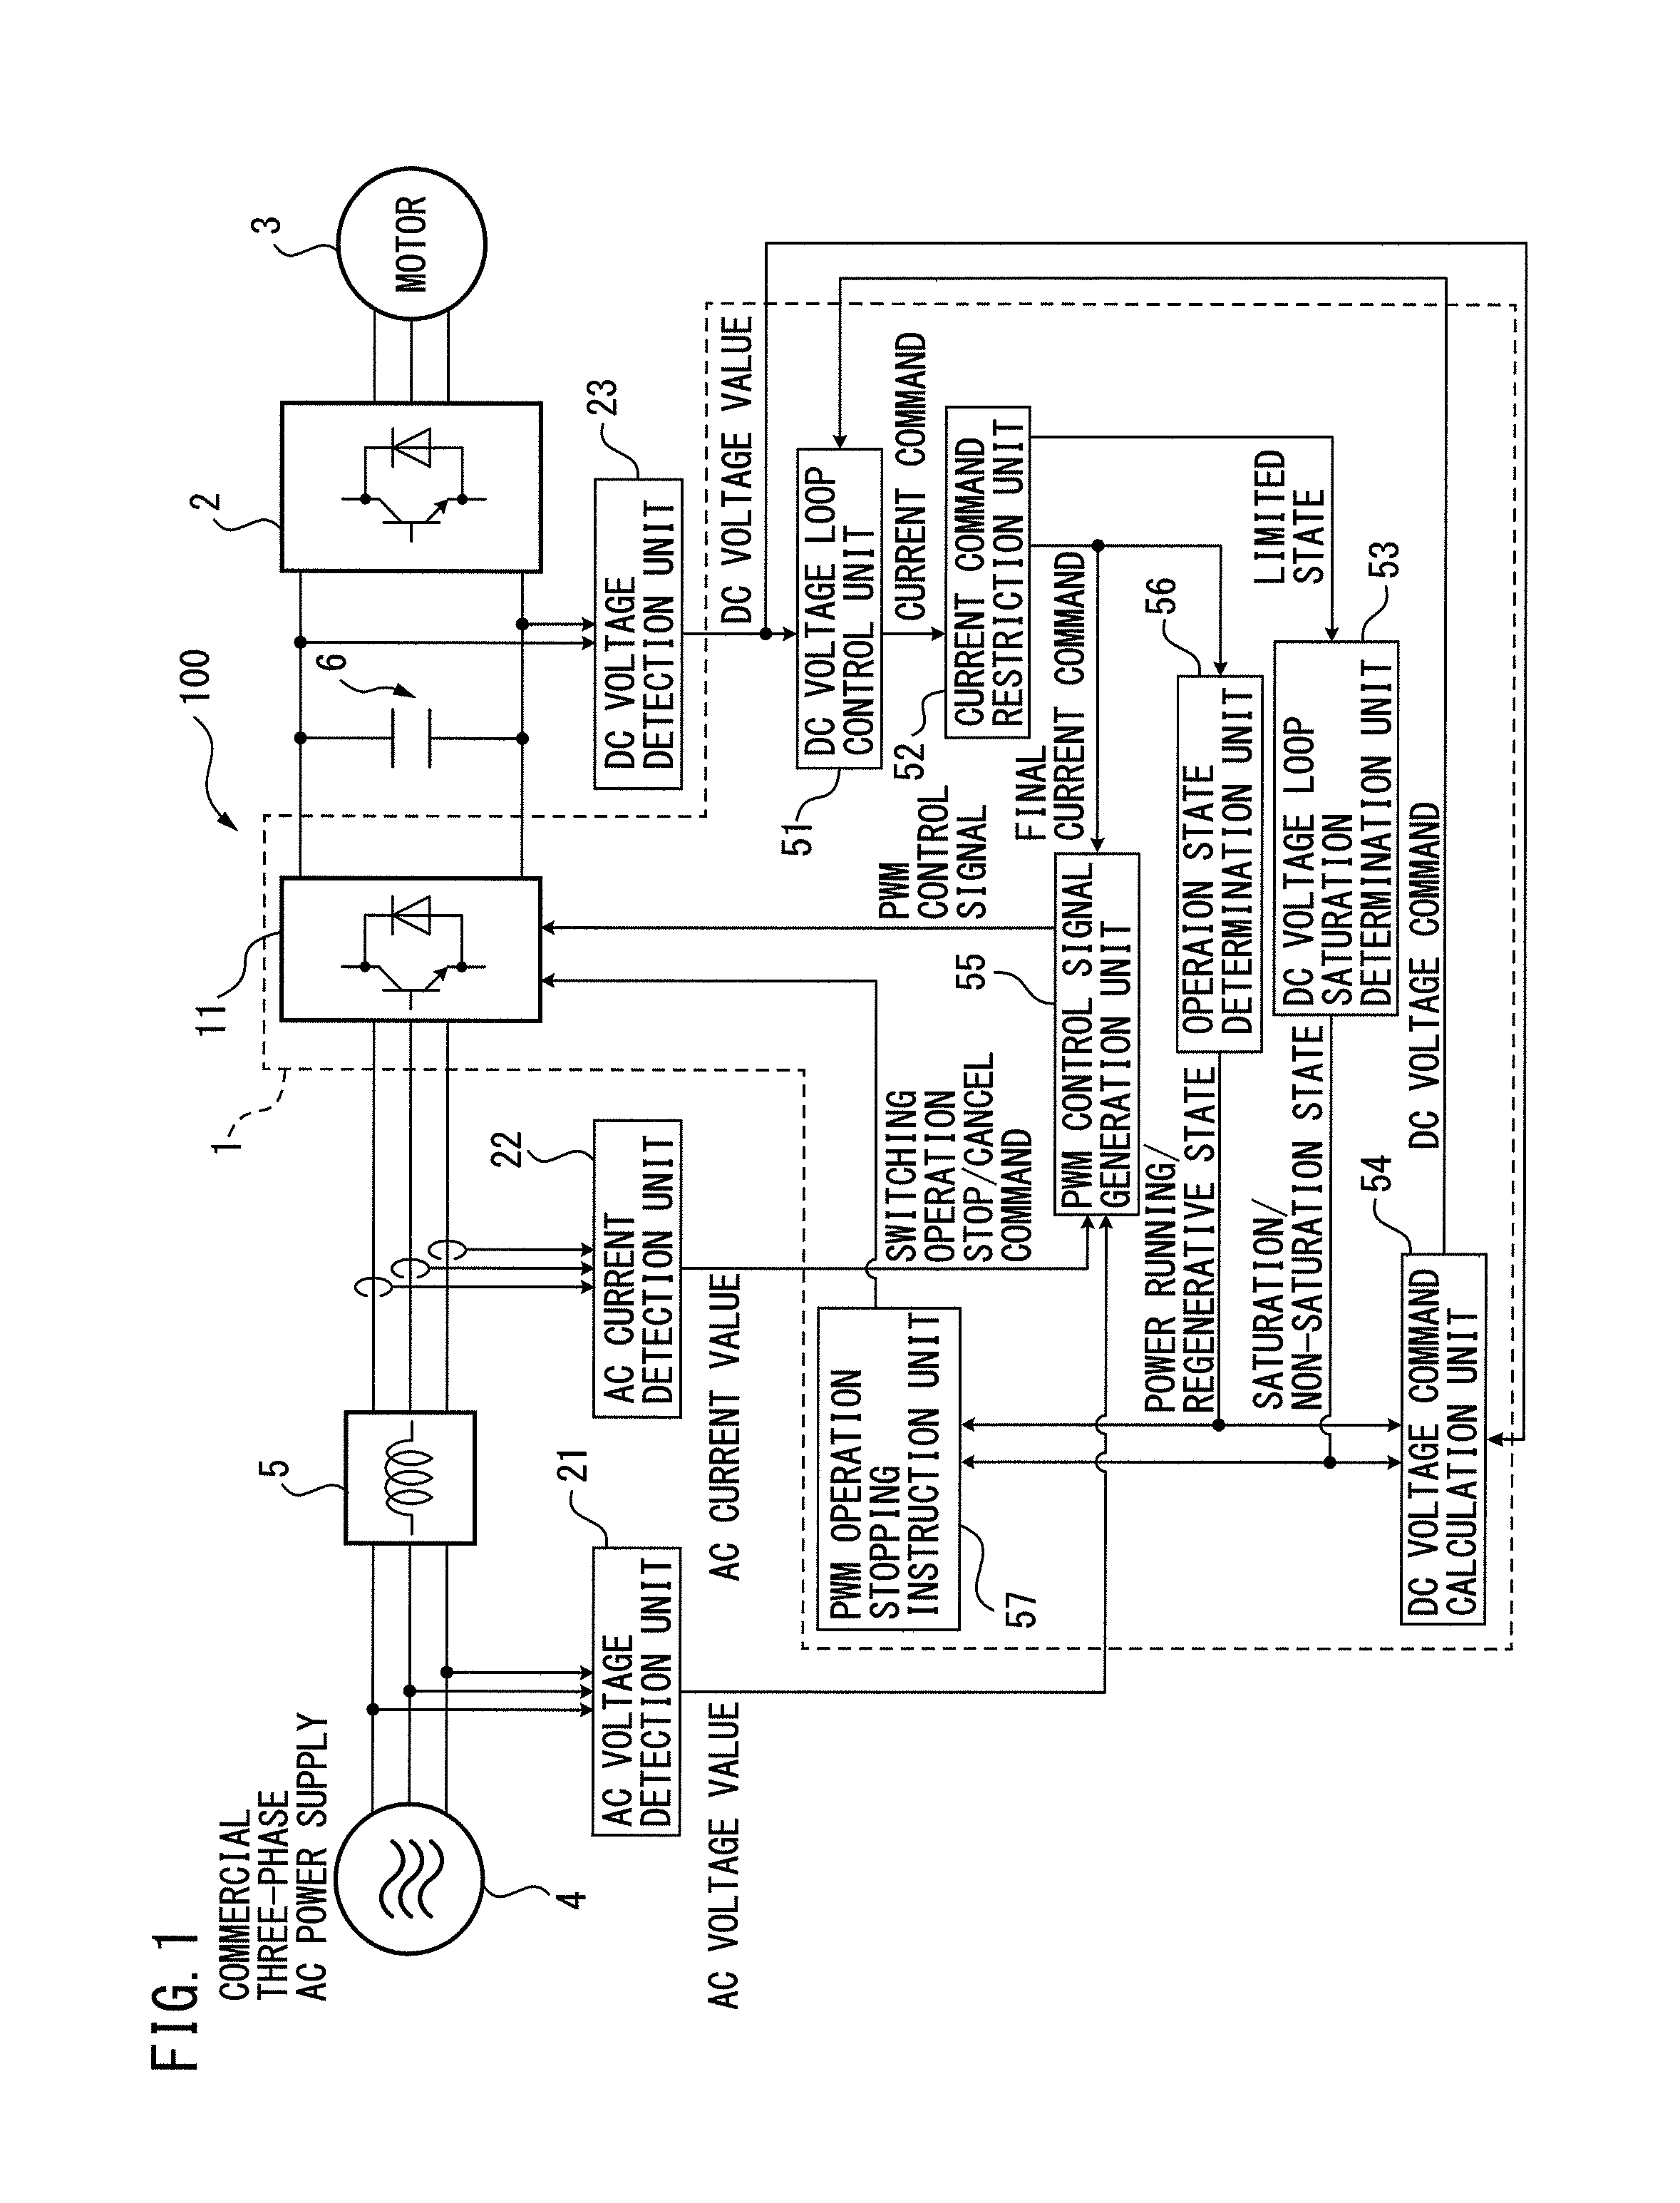 Pwm rectifier for motor drive connected to electric storage device